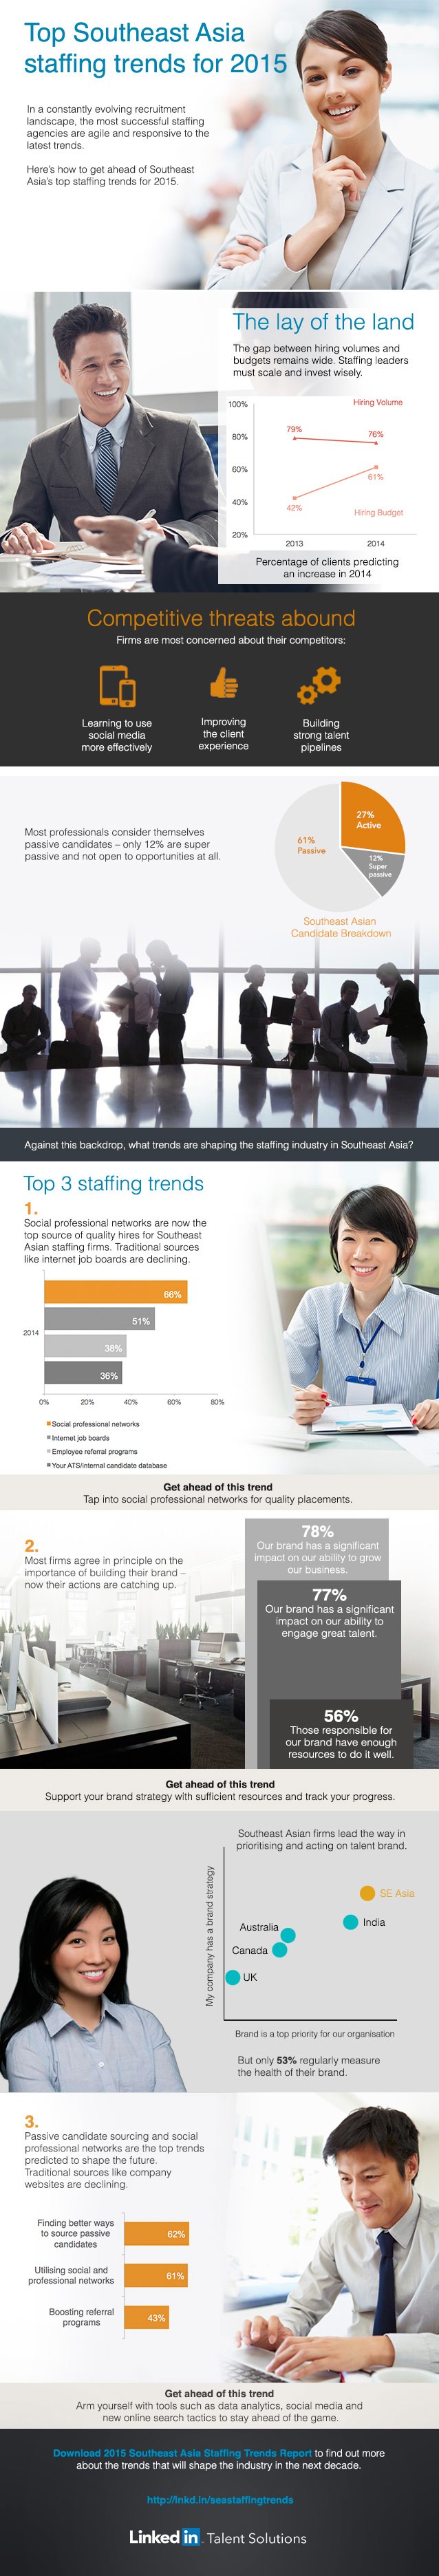 Southeast-Asia-Staffing-Trends-2015